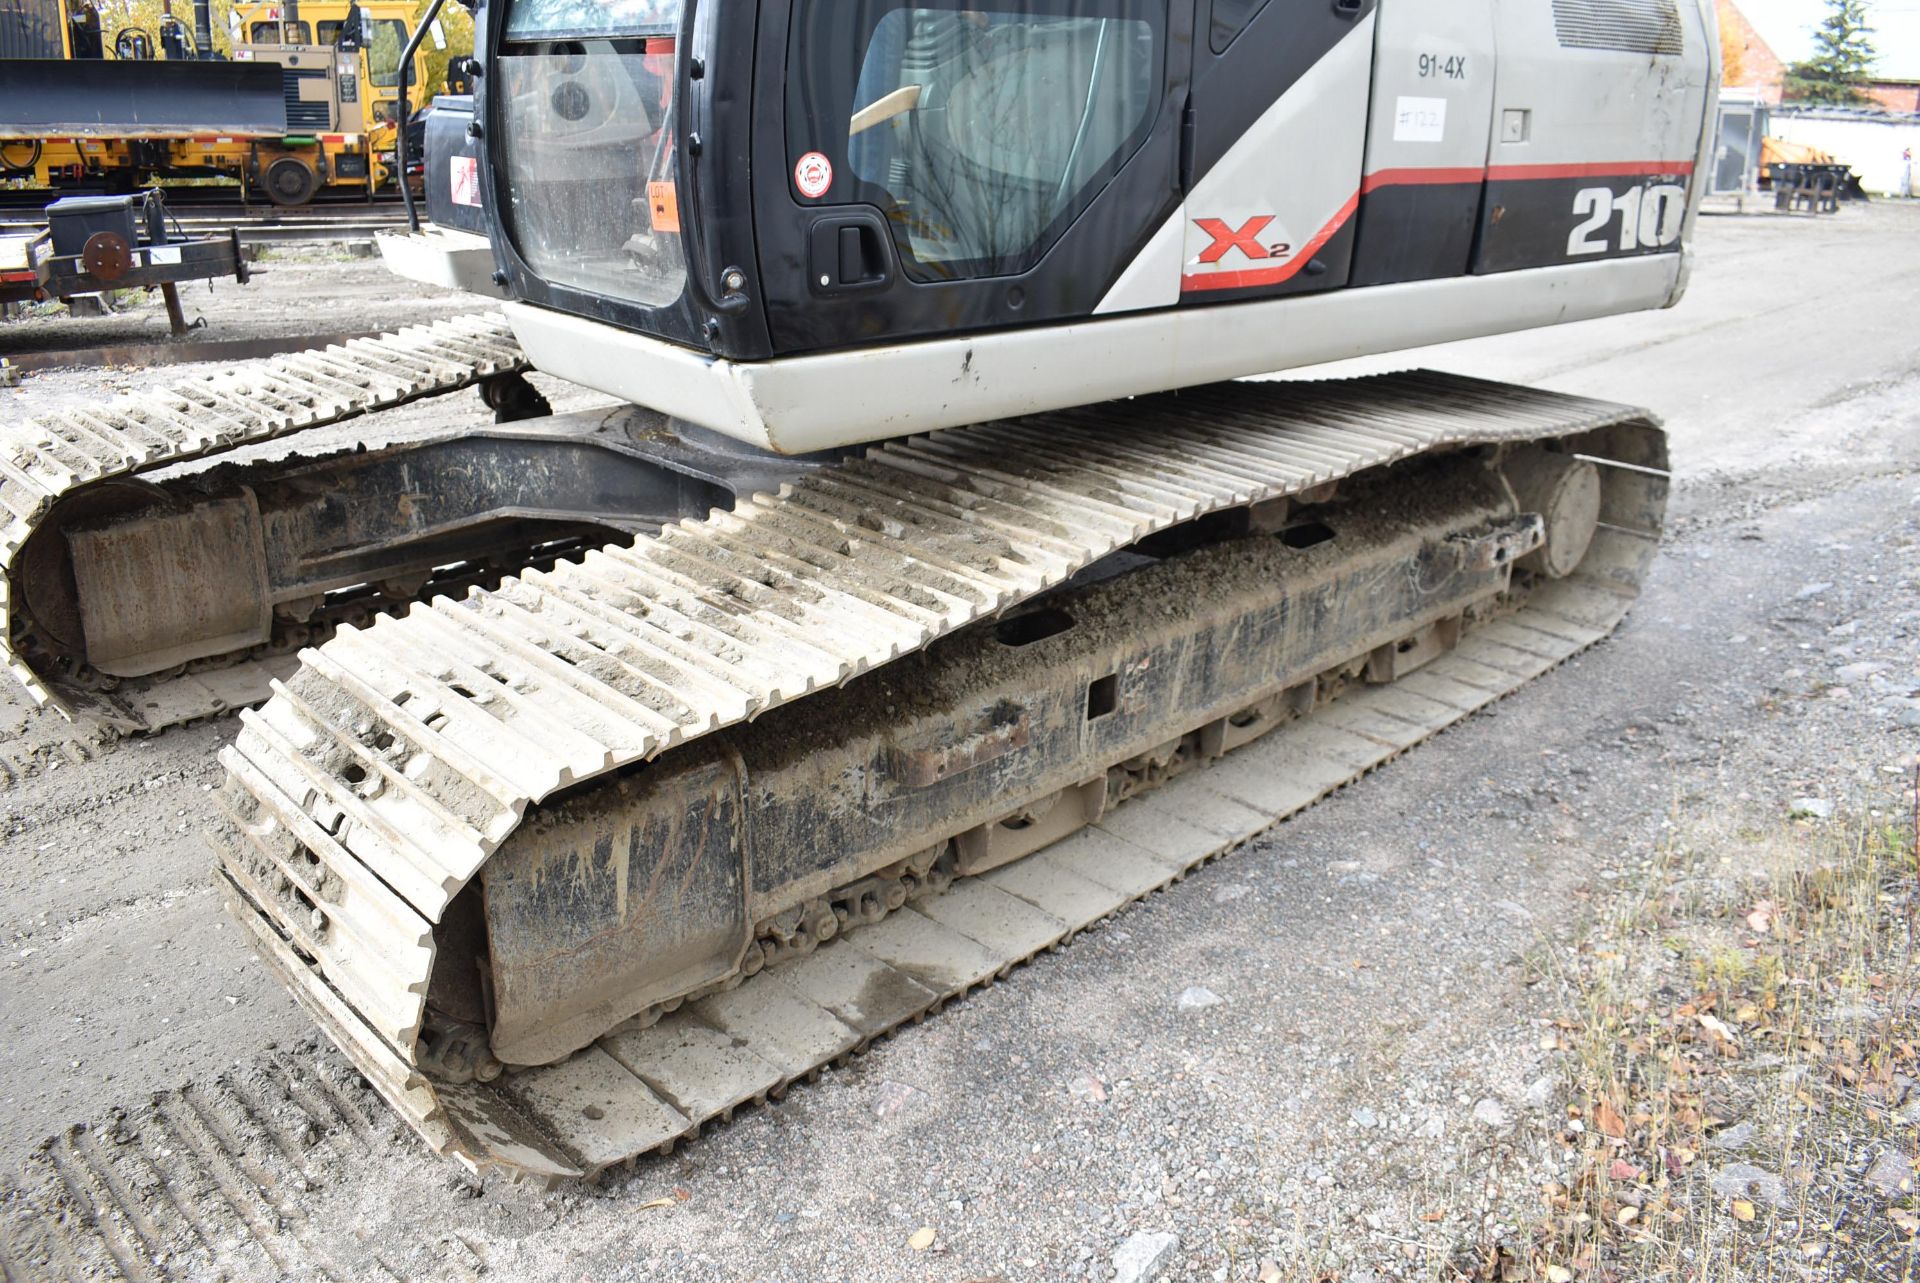 LINK BELT (2010) 210X2 HYDRAULIC TRACKED EXCAVATOR WITH DIESEL ENGINE, 11,075 HRS (RECORDED ON METER - Image 15 of 27